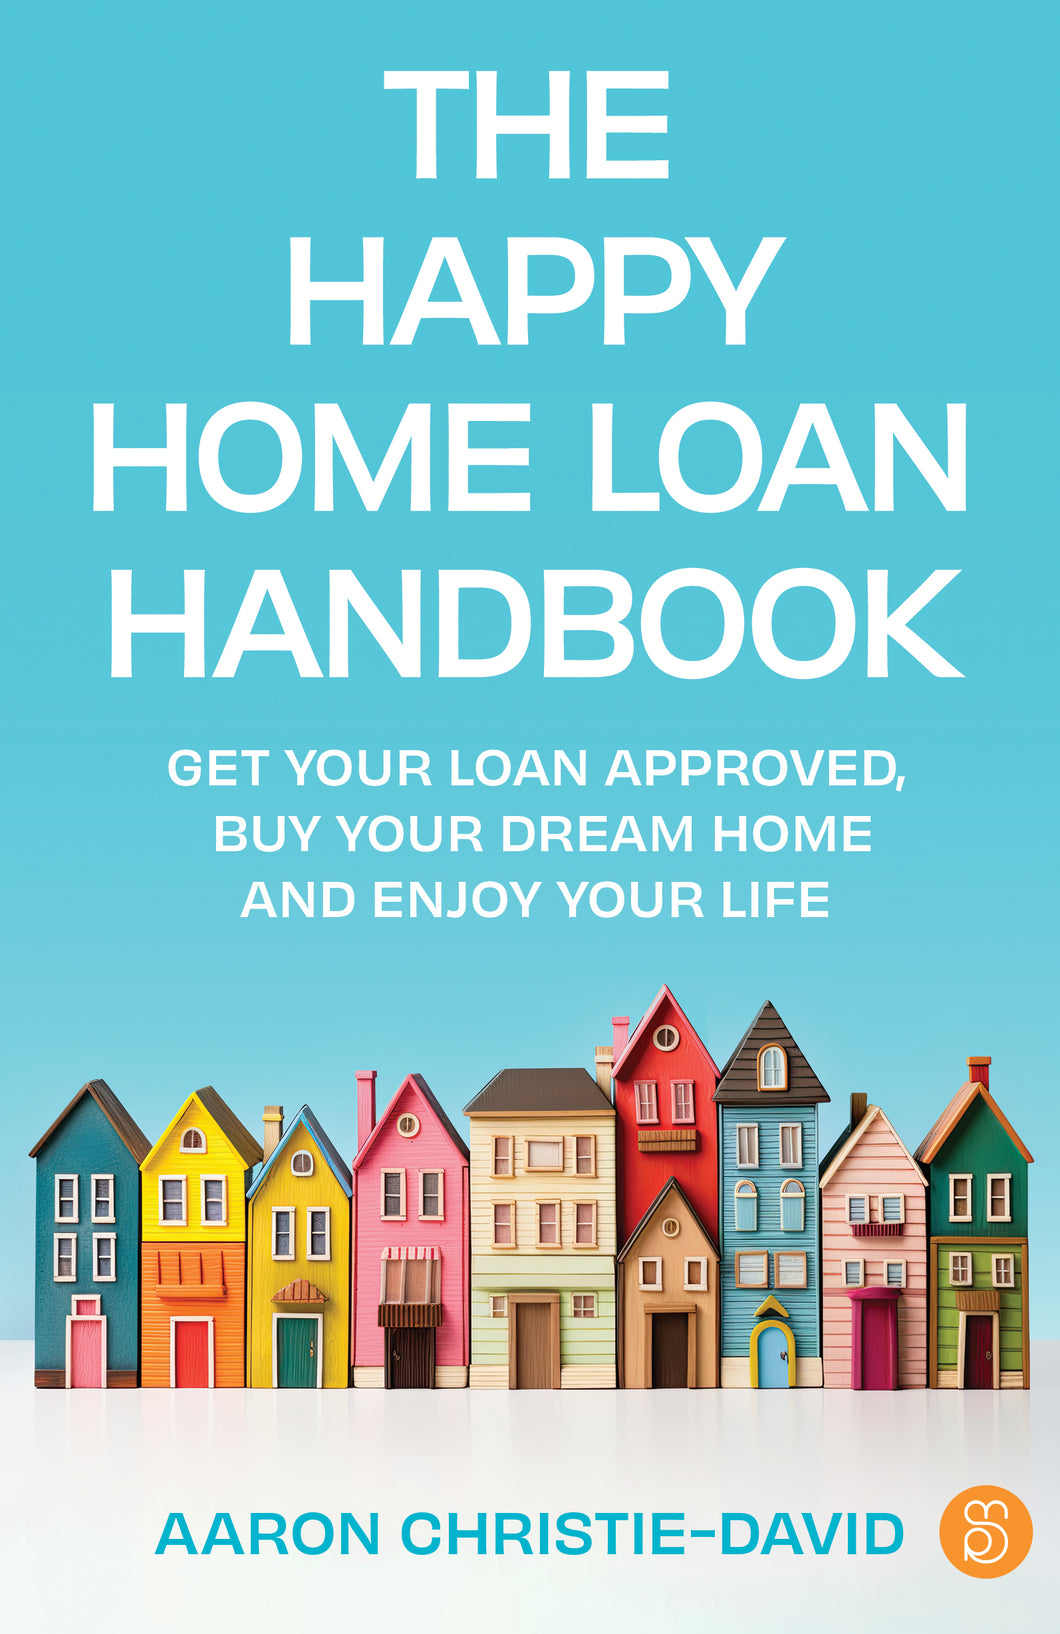 The Happy Home Loan Handbook: Get your loan approved, buy your dream home and enjoy your life<br><i><small> by Aaron Christie-David </i> </small>